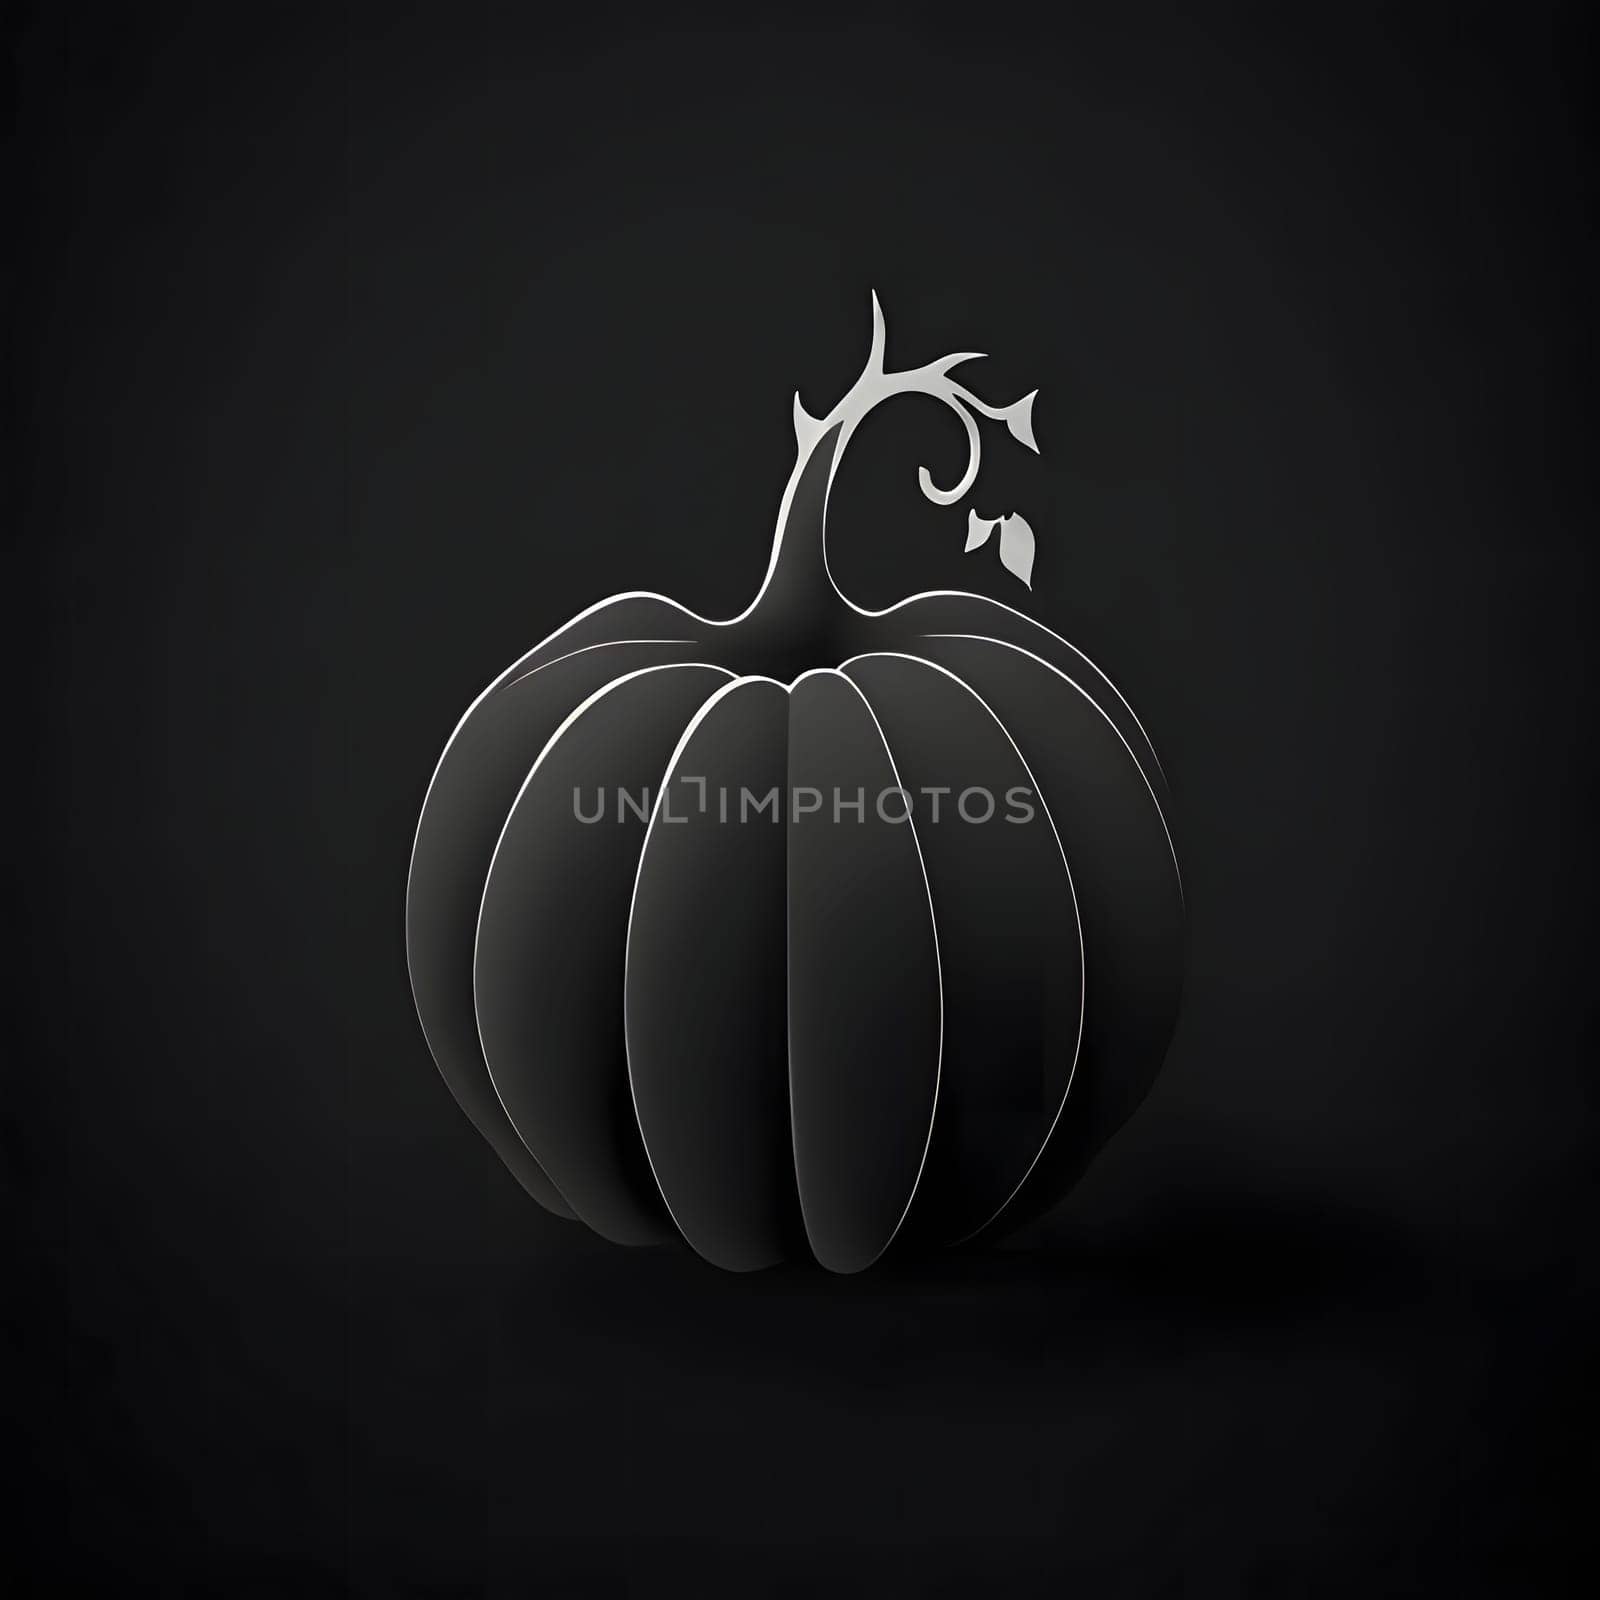 Black modern pumpkin logo. Pumpkin as a dish of thanksgiving for the harvest. An atmosphere of joy and celebration.